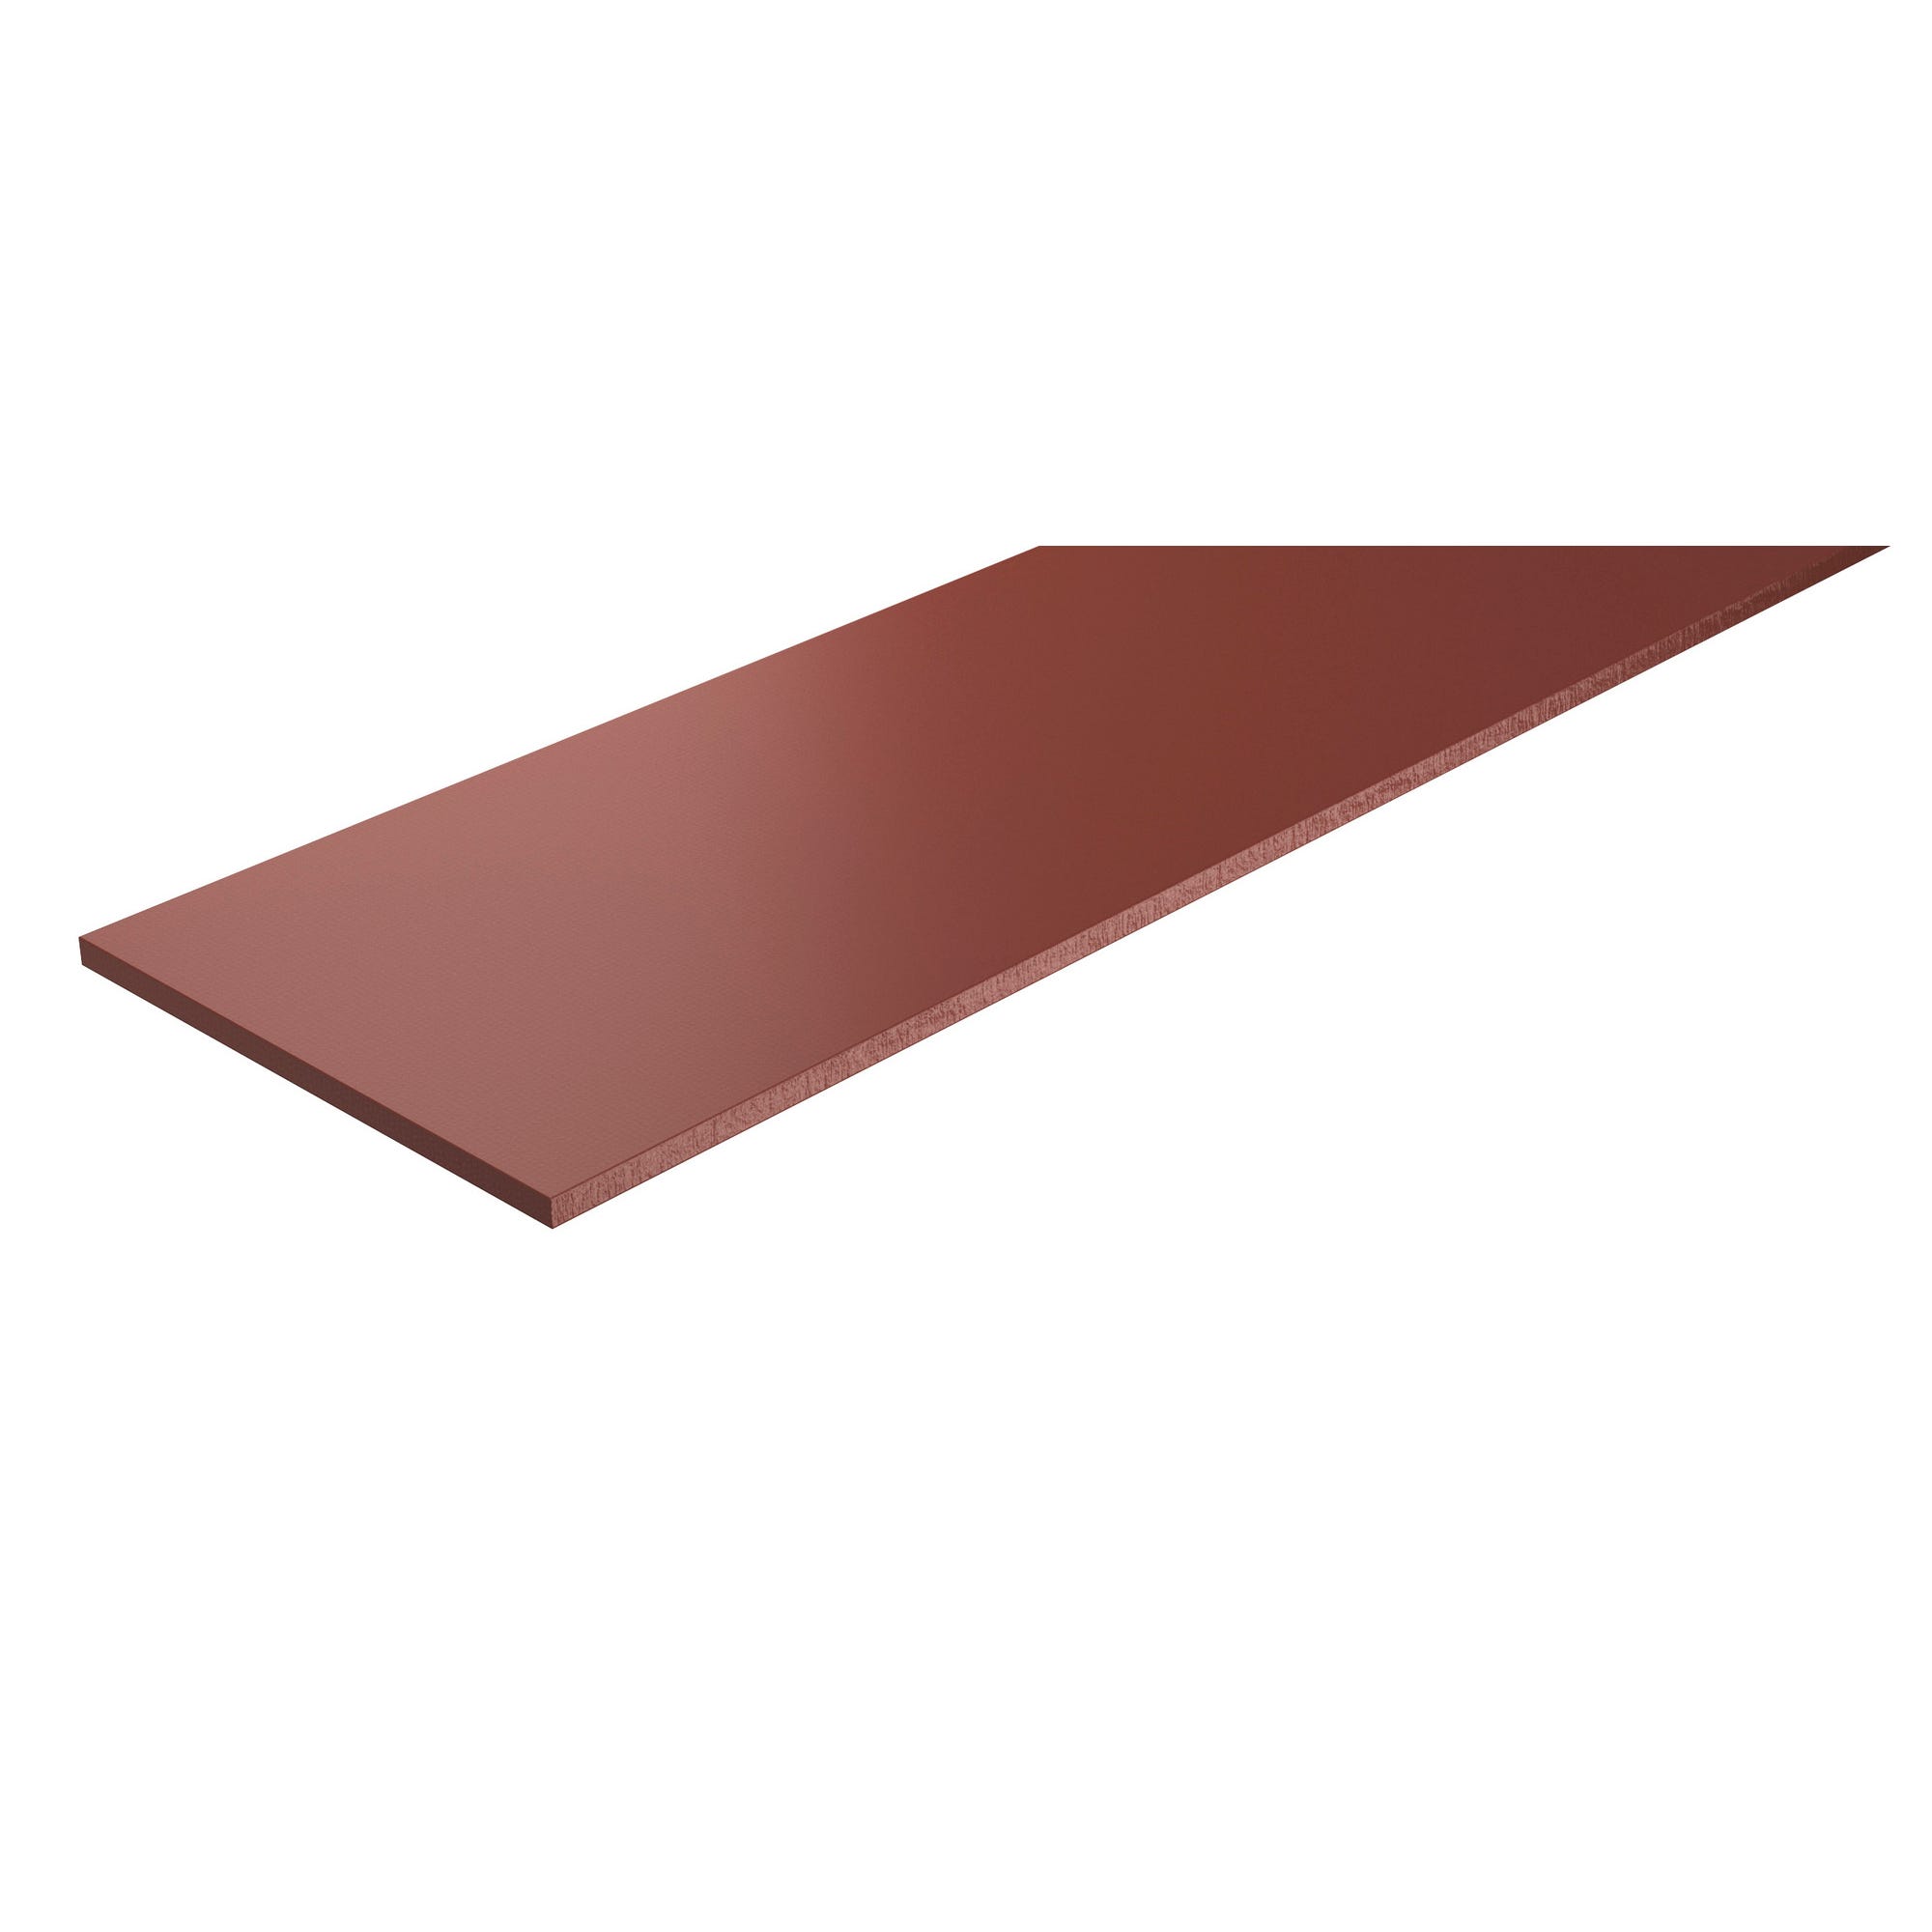 Clin pour bardage rouge traditionnel L.3600 × l.180 × Ep.8 mm HardiePlank Smooth 0